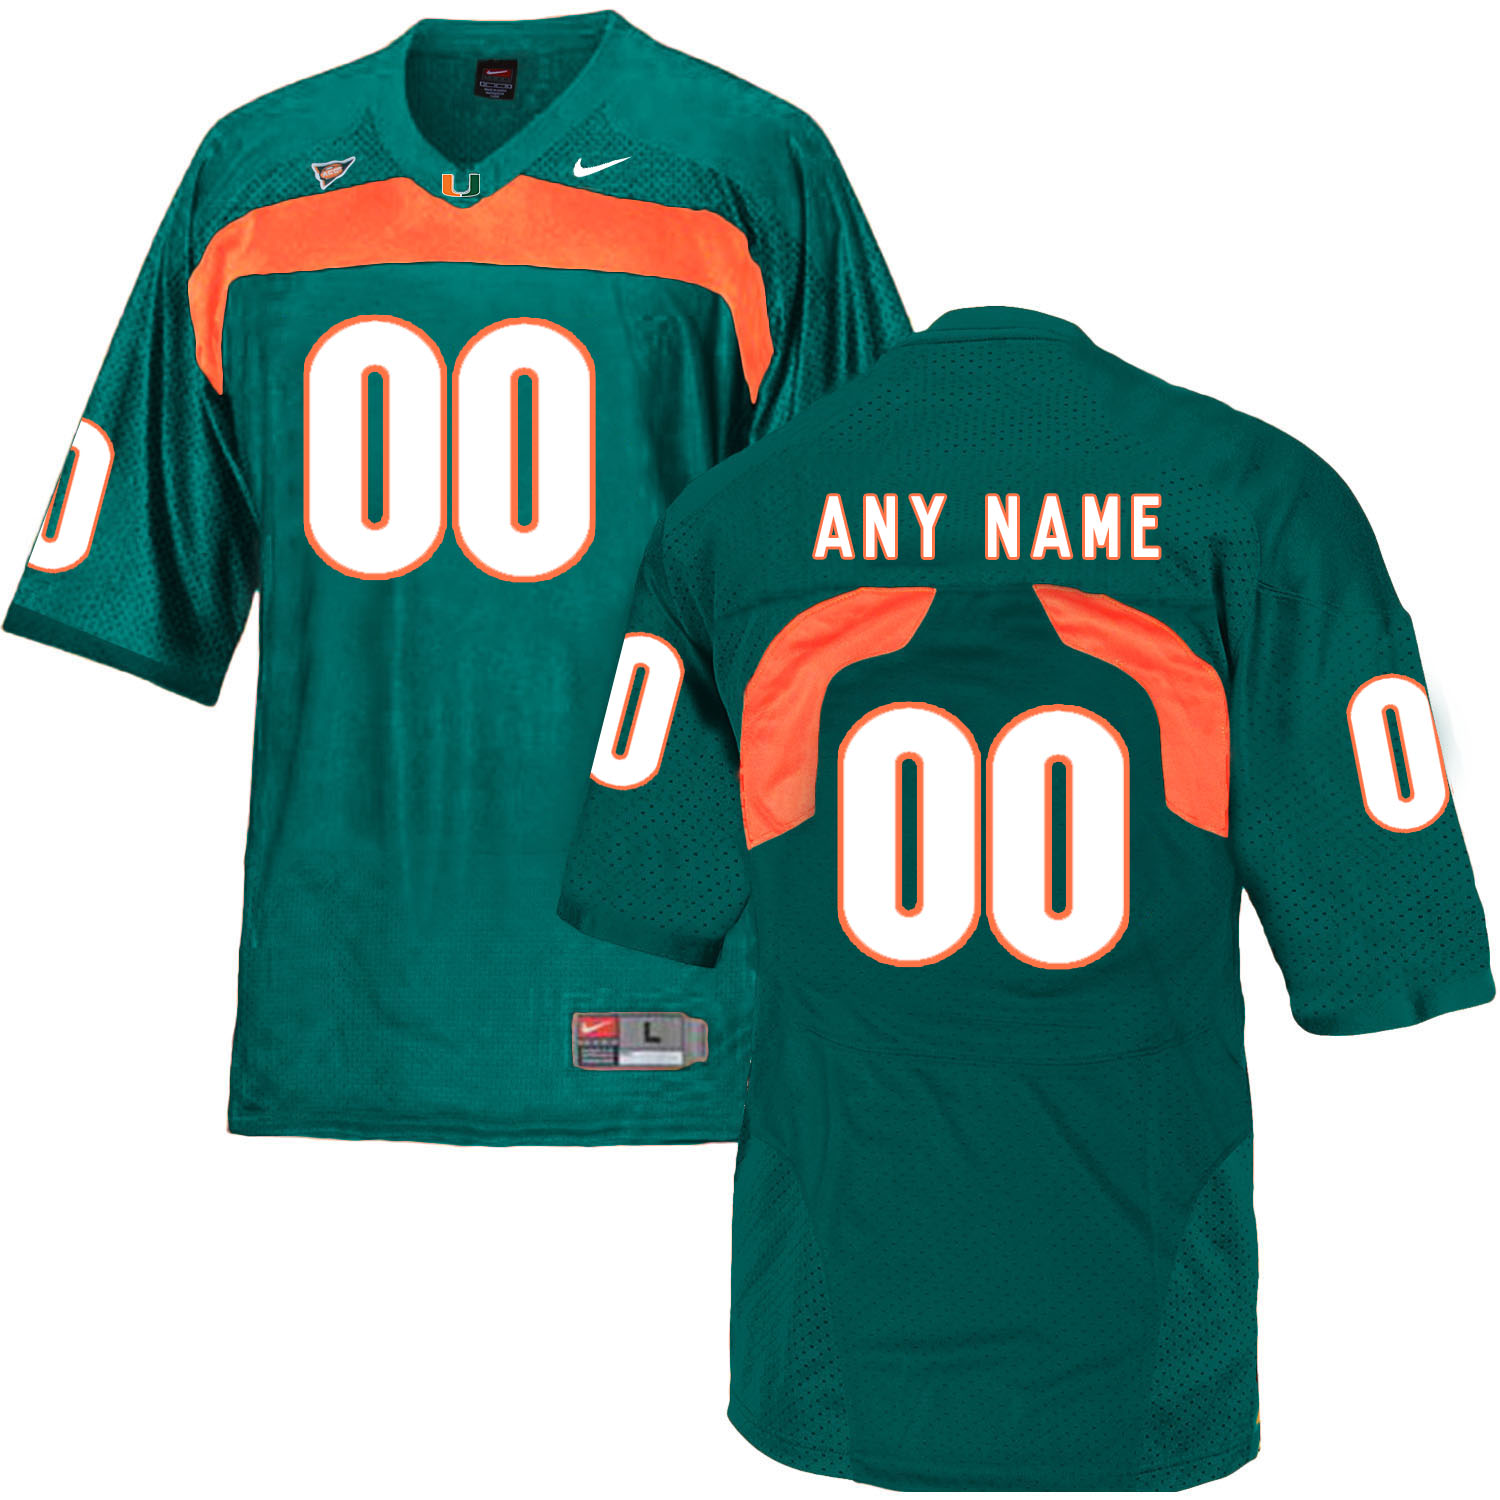 Miami Hurricanes Green Customized College Football Jersey